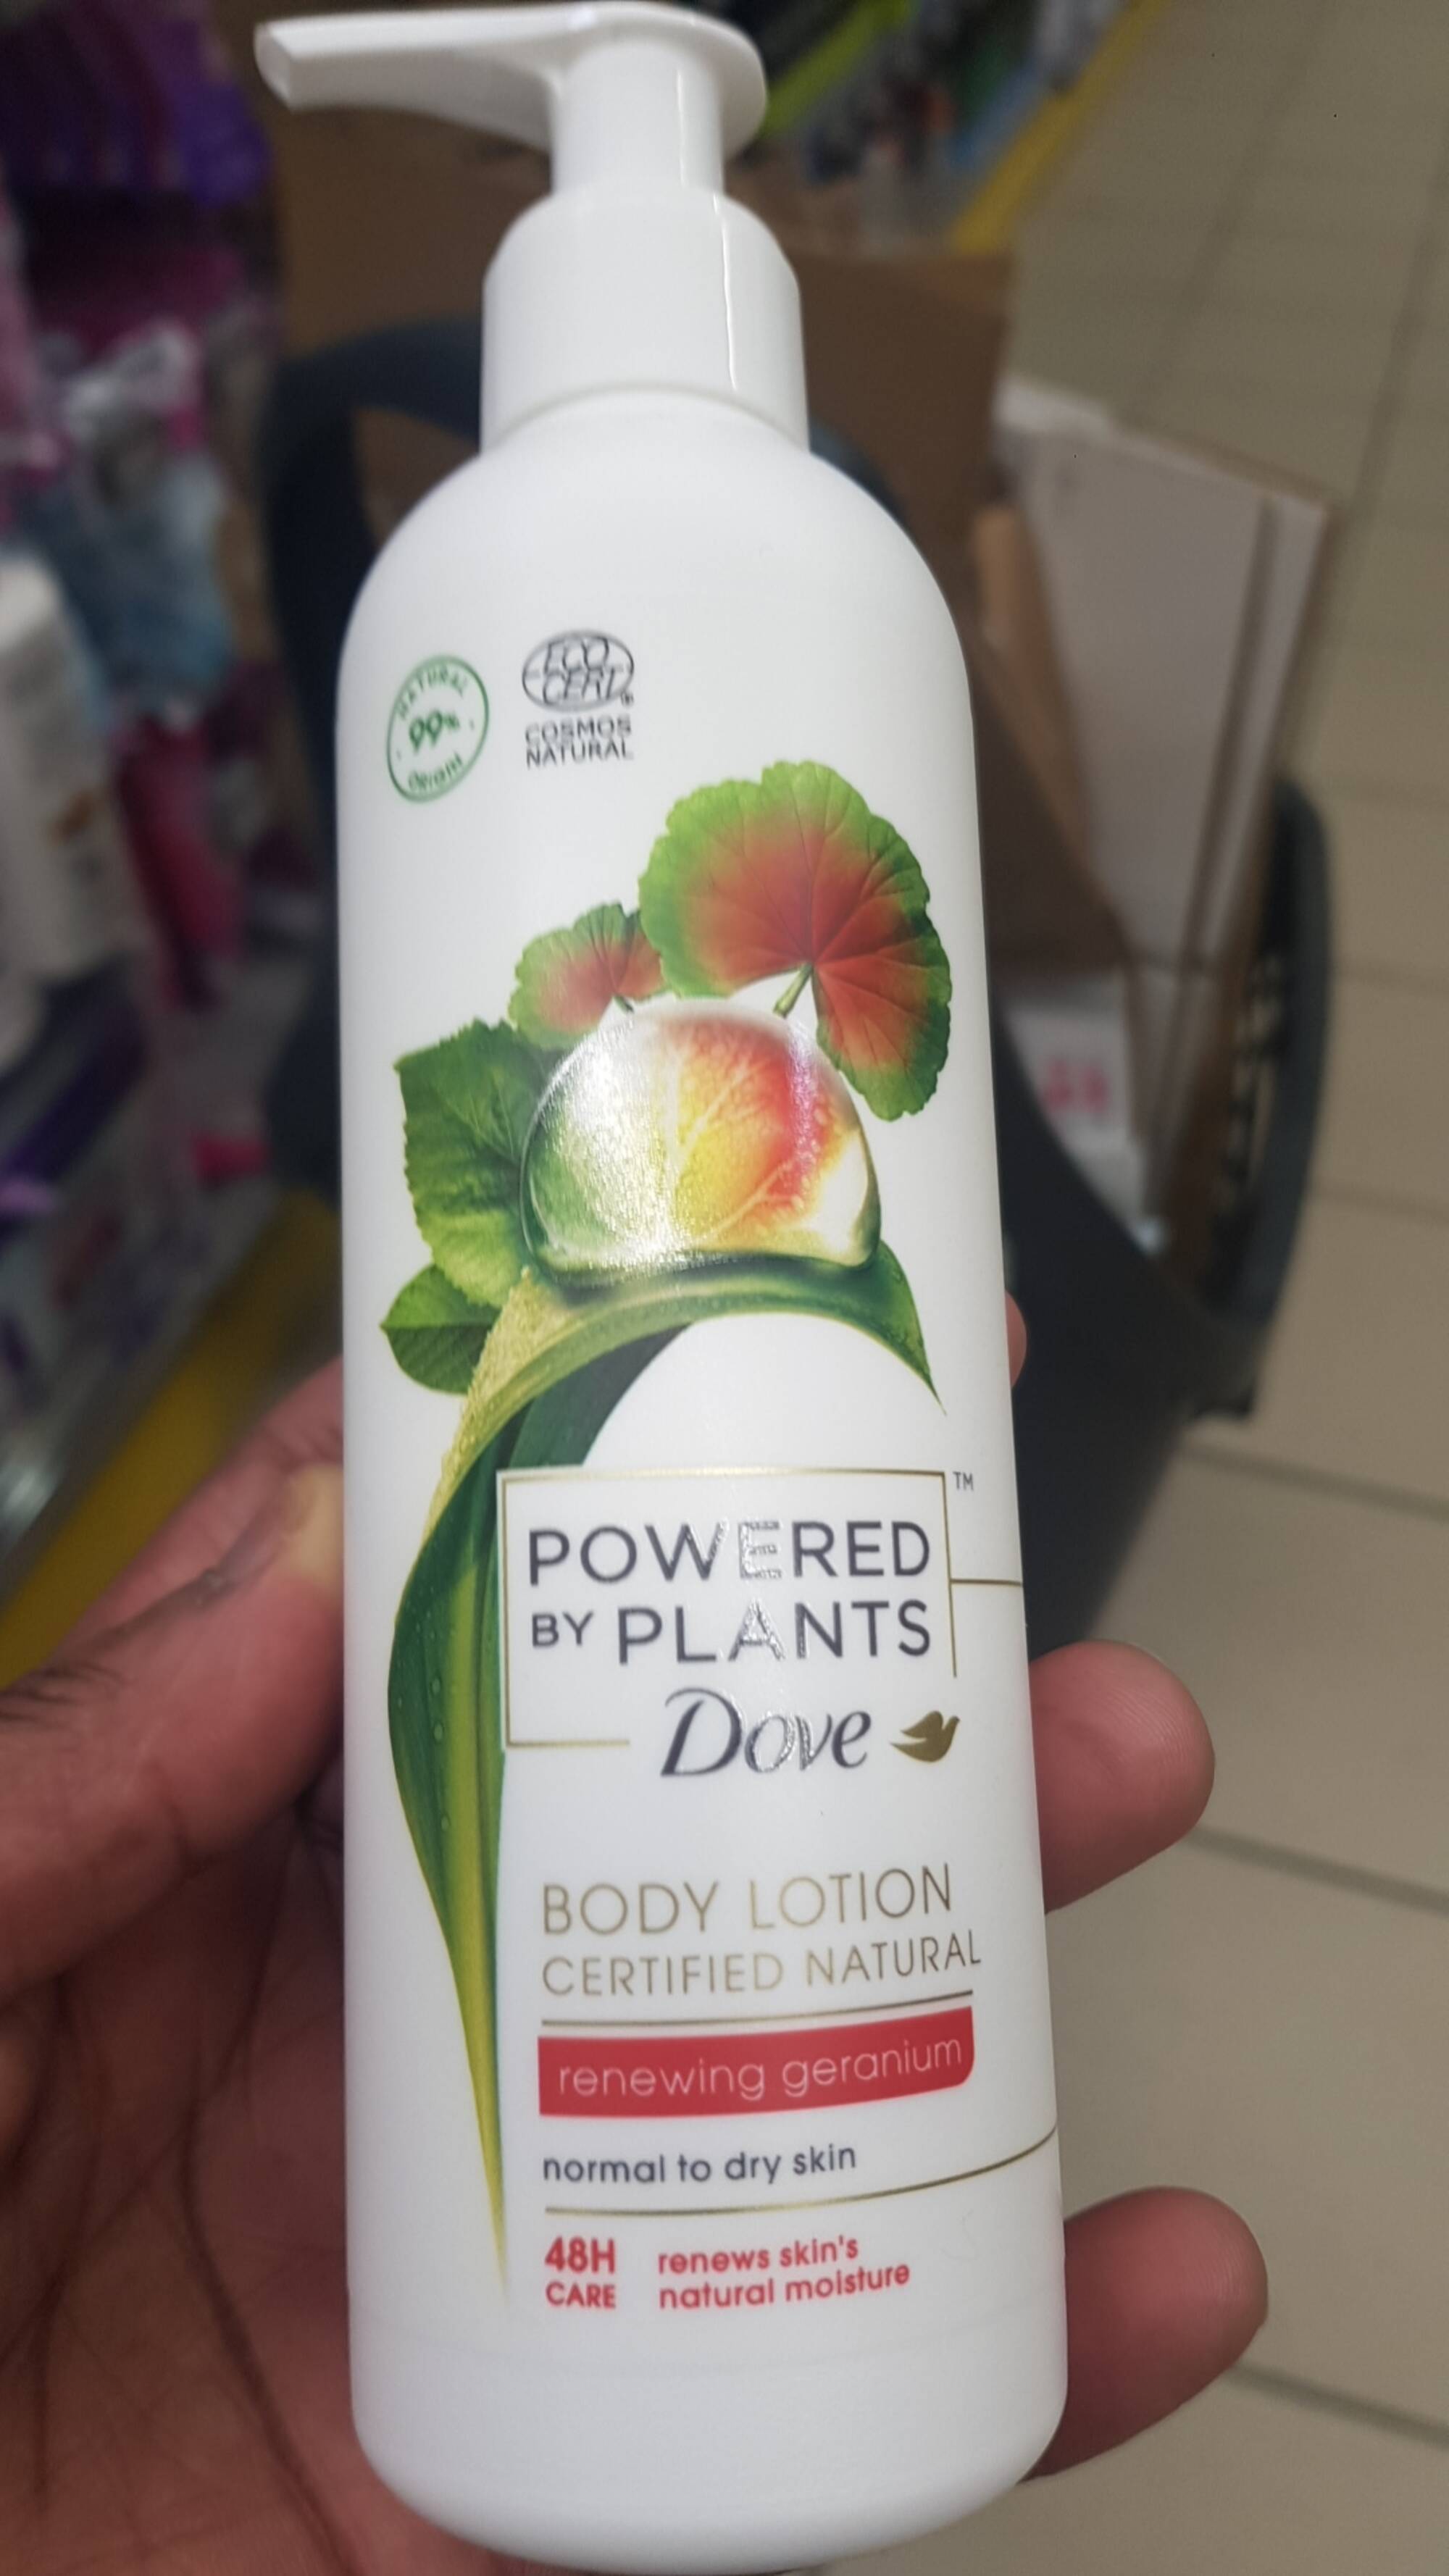 DOVE - Powered by plants - Body lotion